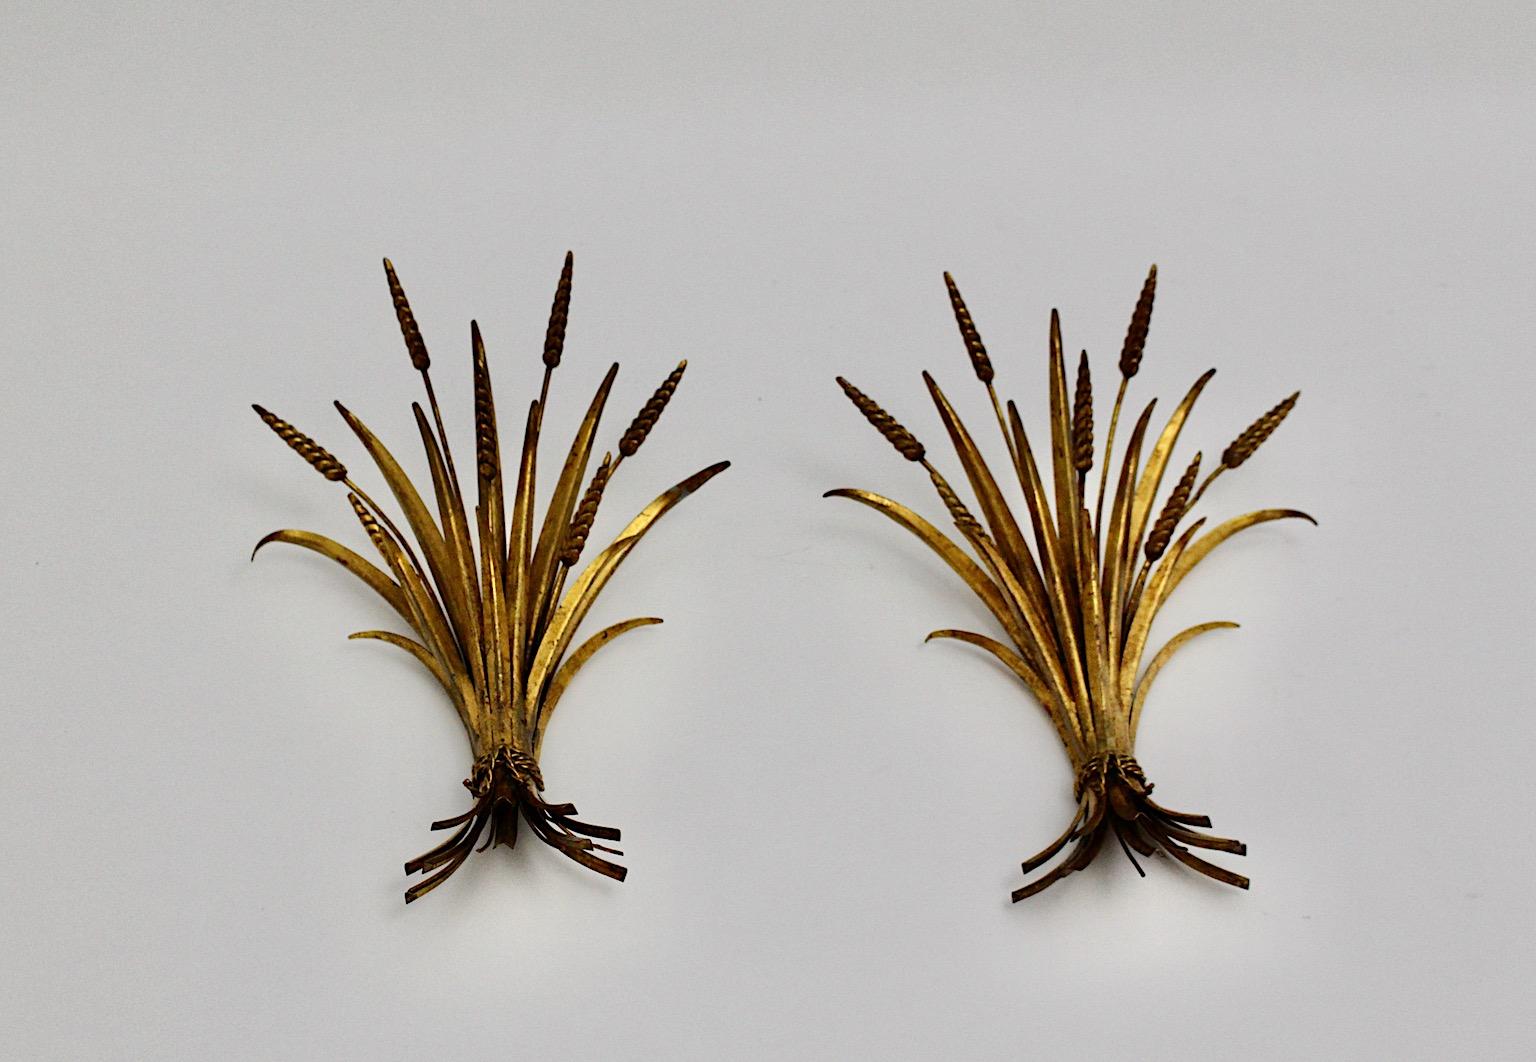 Hollywood Regency Style vintage pair of sheaf of wheat wheat appliques or sconces from gilt metal 1970s France.
Wonderful elegant wall mounted pair of appliques or sconces sheaf of wheat like worked in warm golden tone. 
It is nice to know that